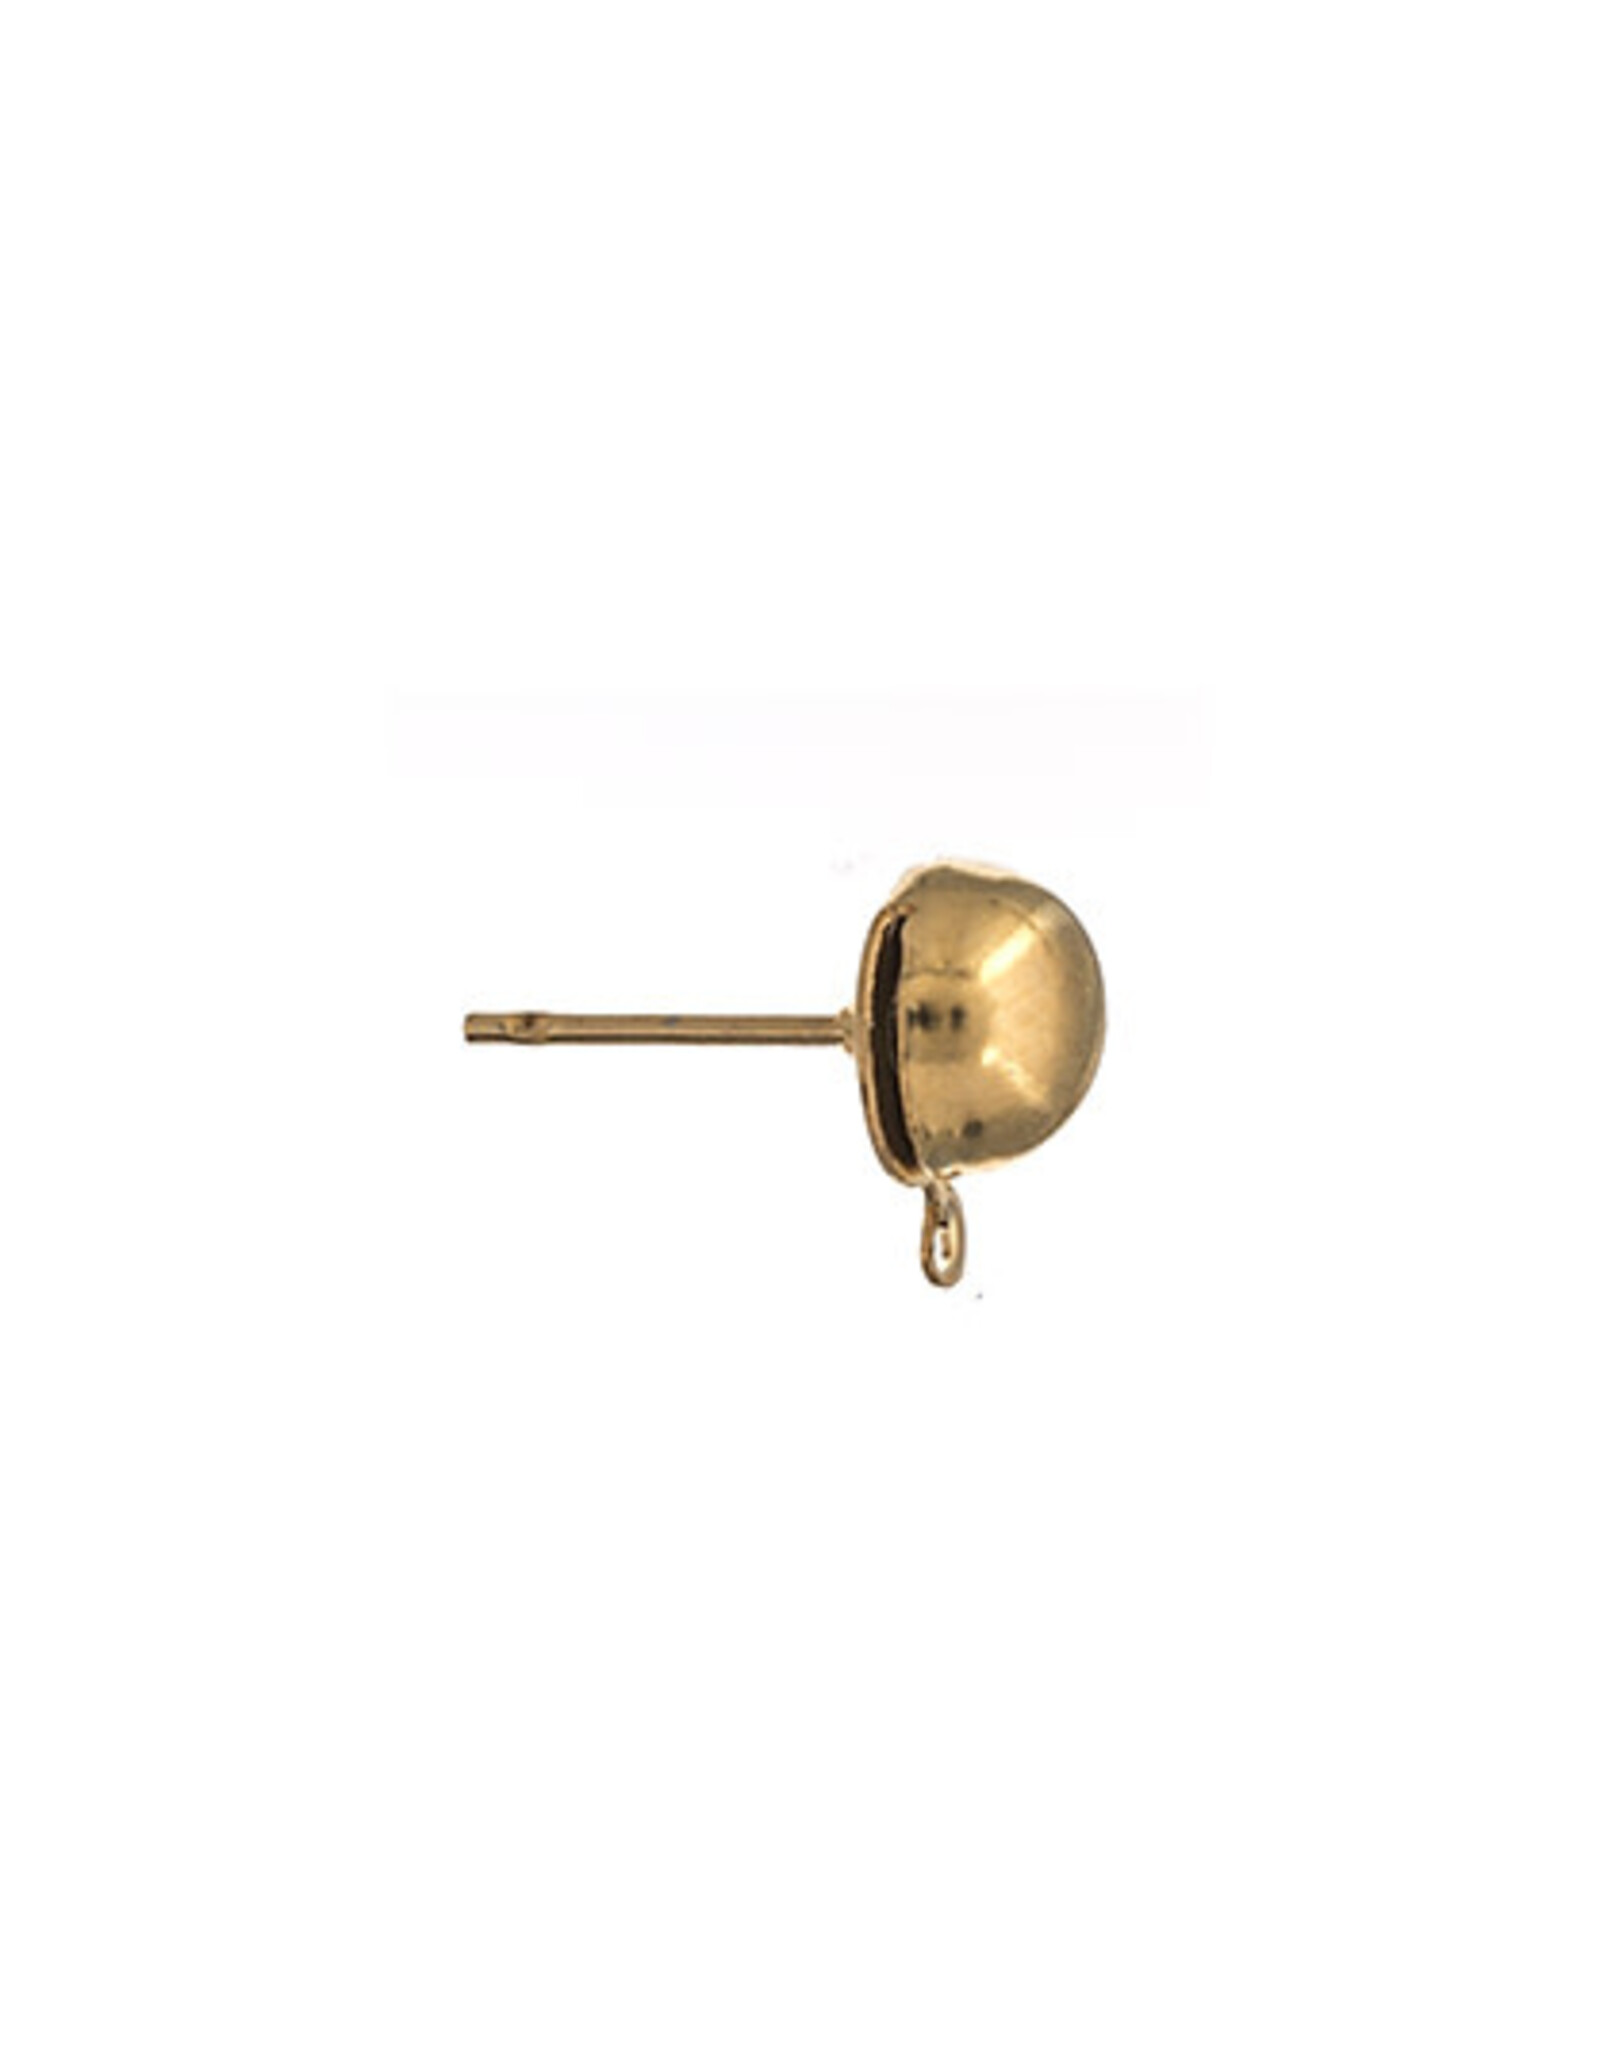 Earring Stud Domed with Loop  7mm Gold Colour NF x10